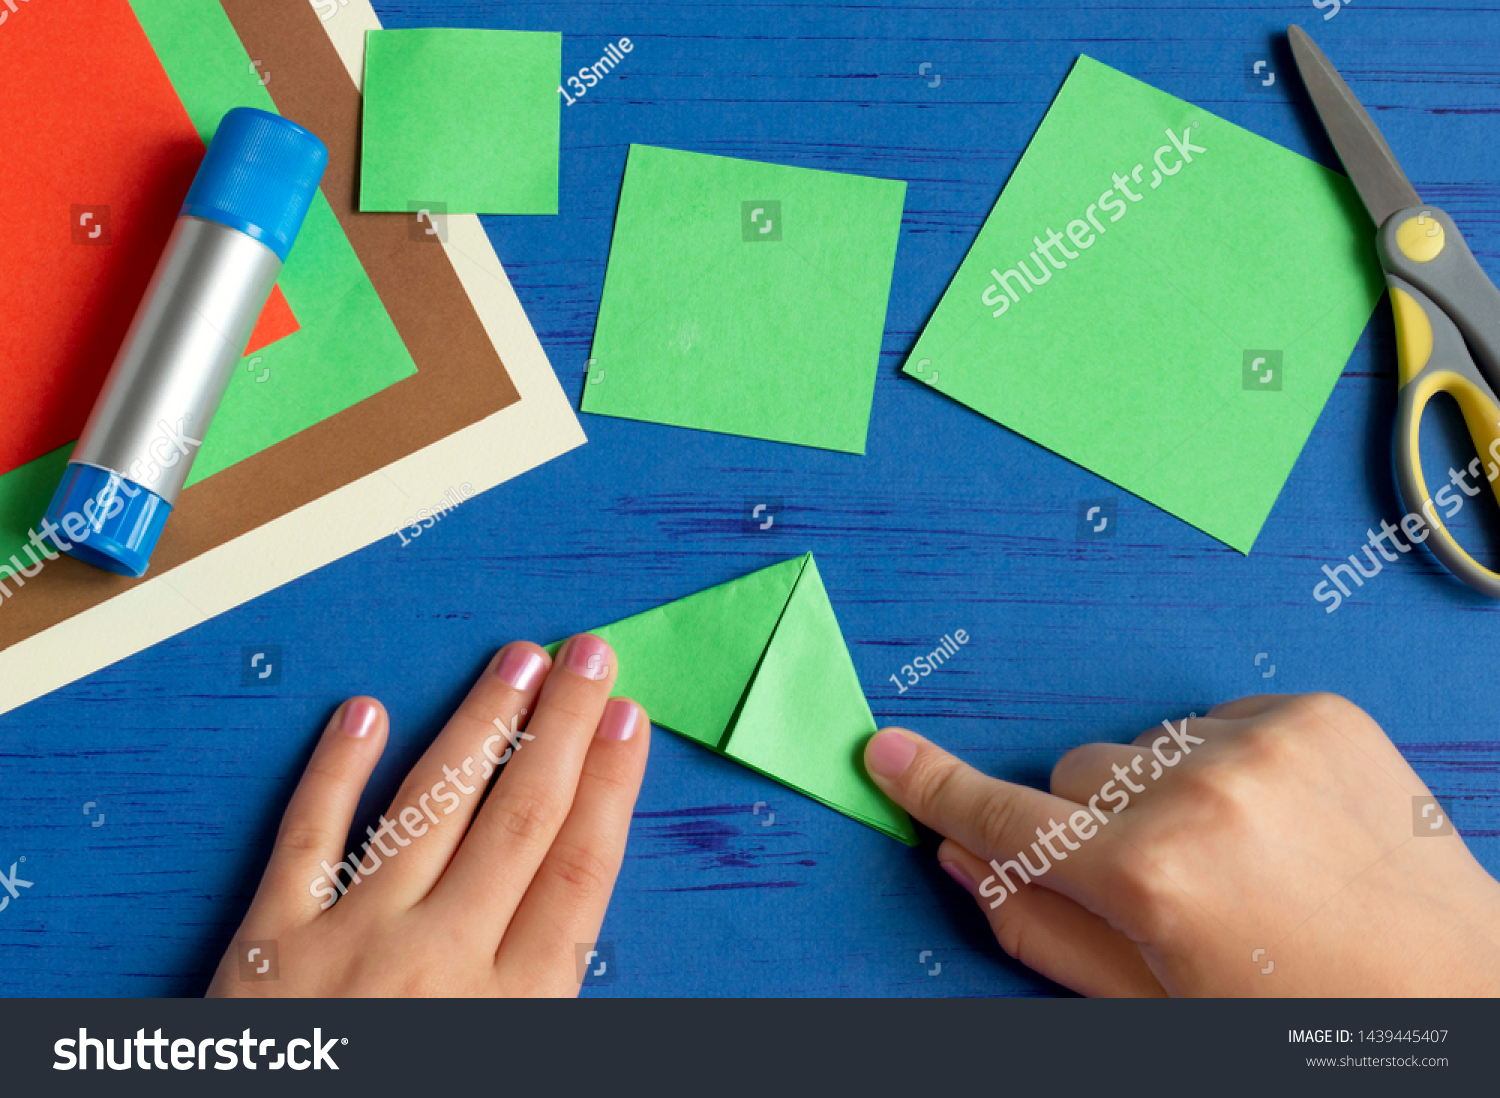 How to make Christmas card with Christmas tree. Original children's art project. DIY concept. Step-by-step photo instructions. Step 4. Fold corners towards each other  #1439445407